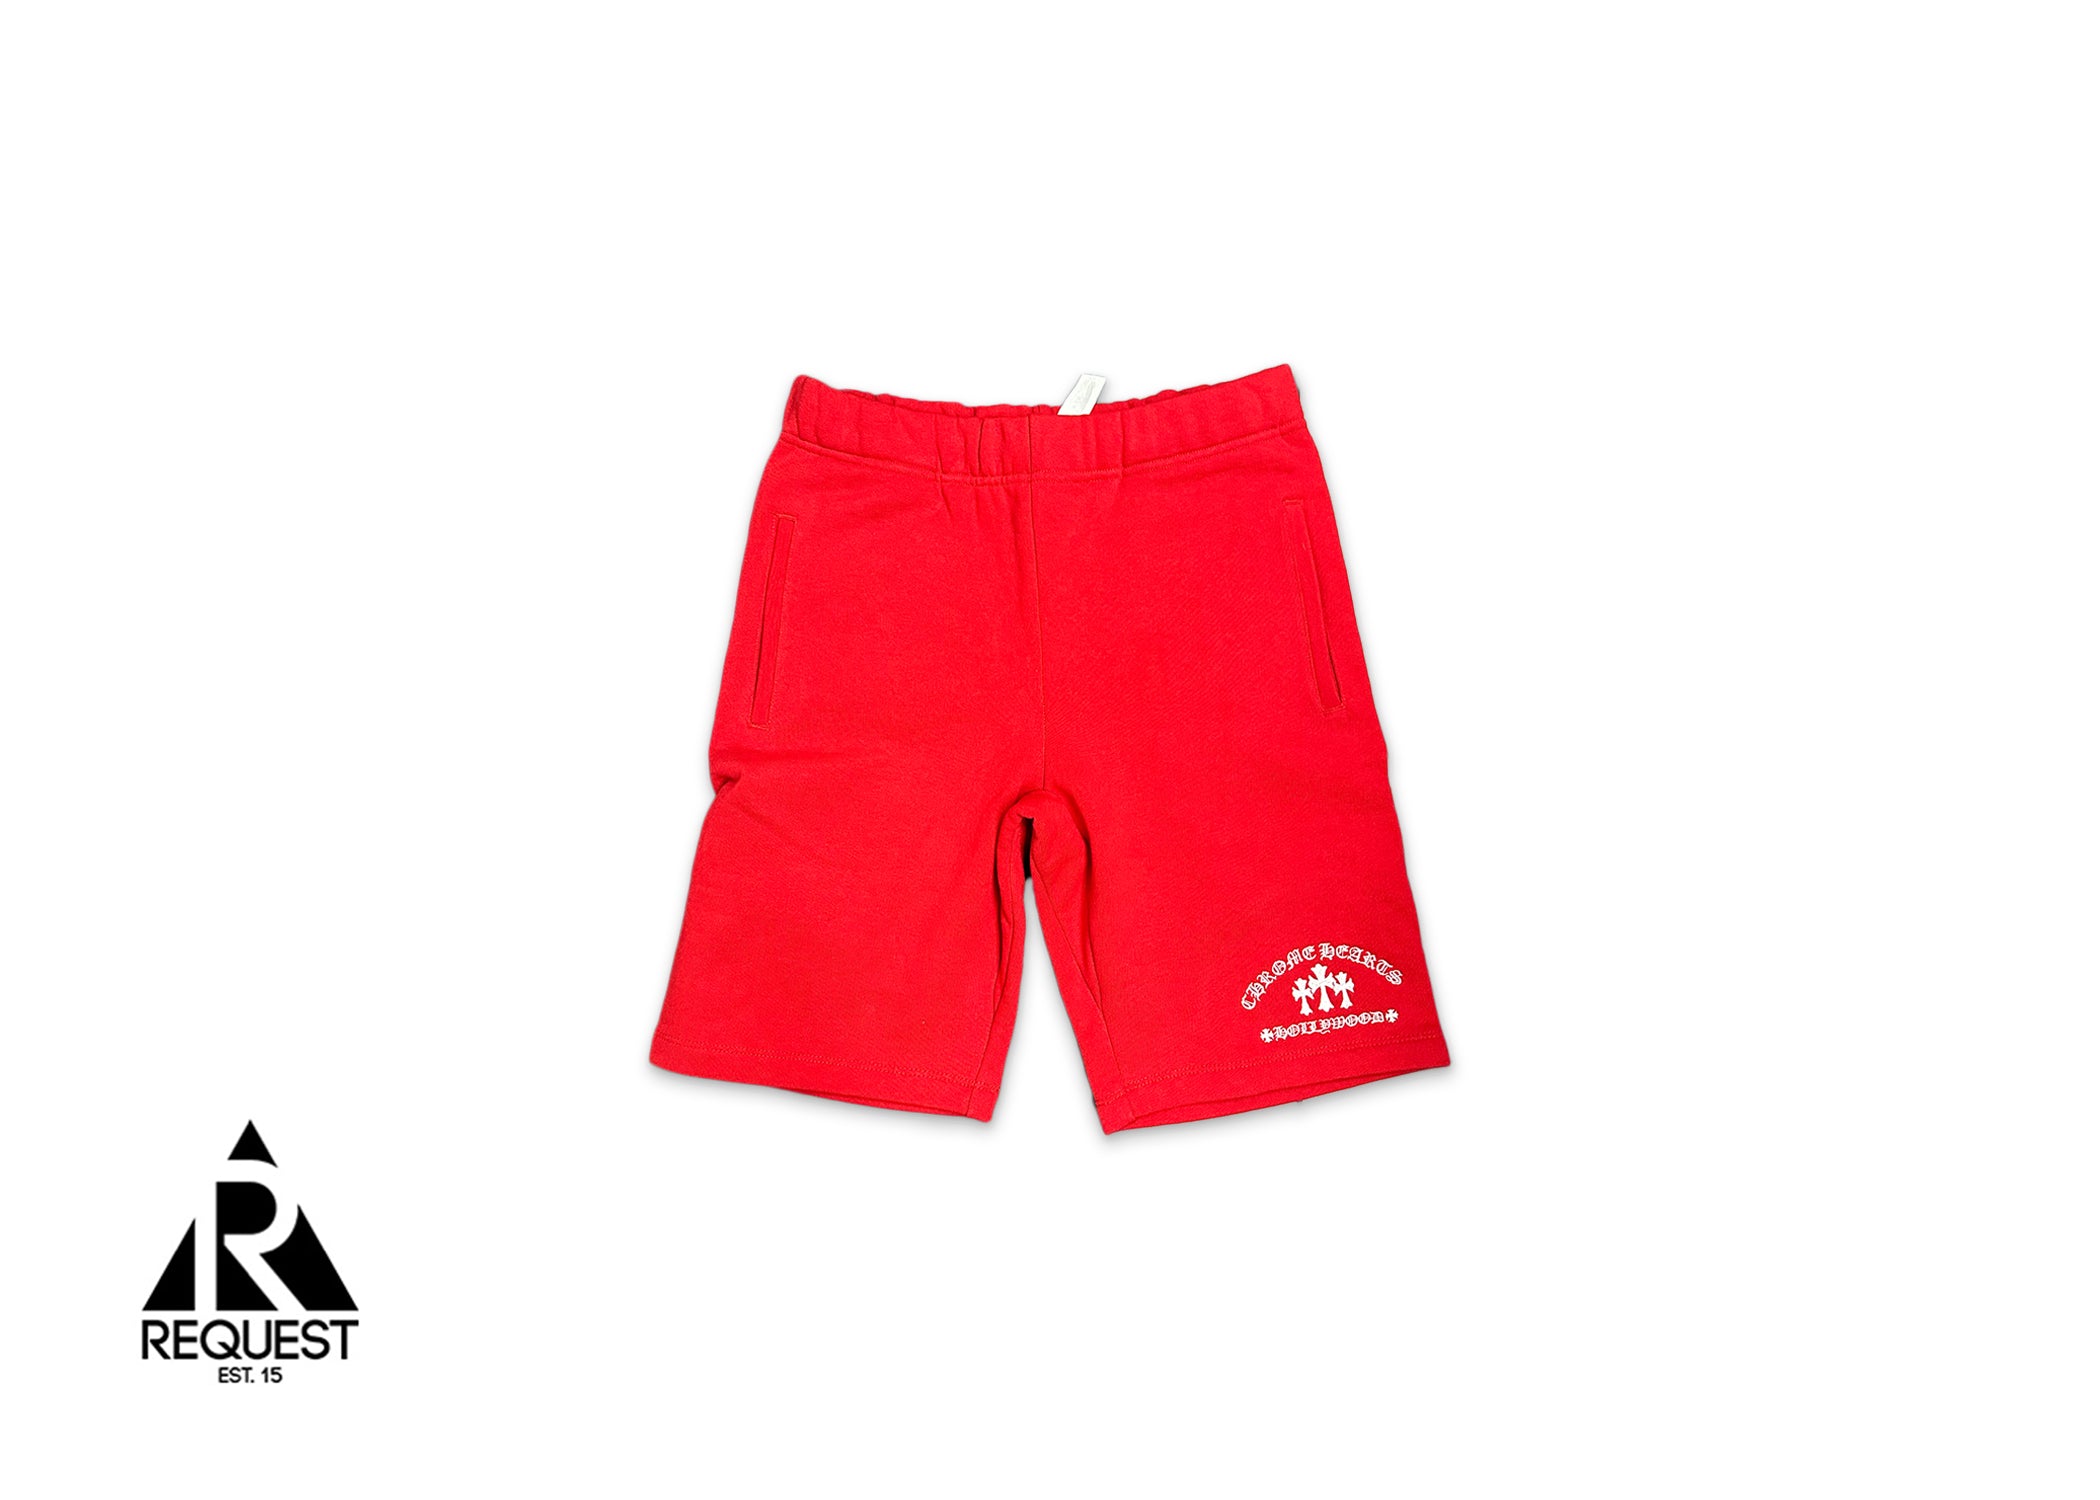 Chrome Hearts Cross Shorts "Red Hollywood"